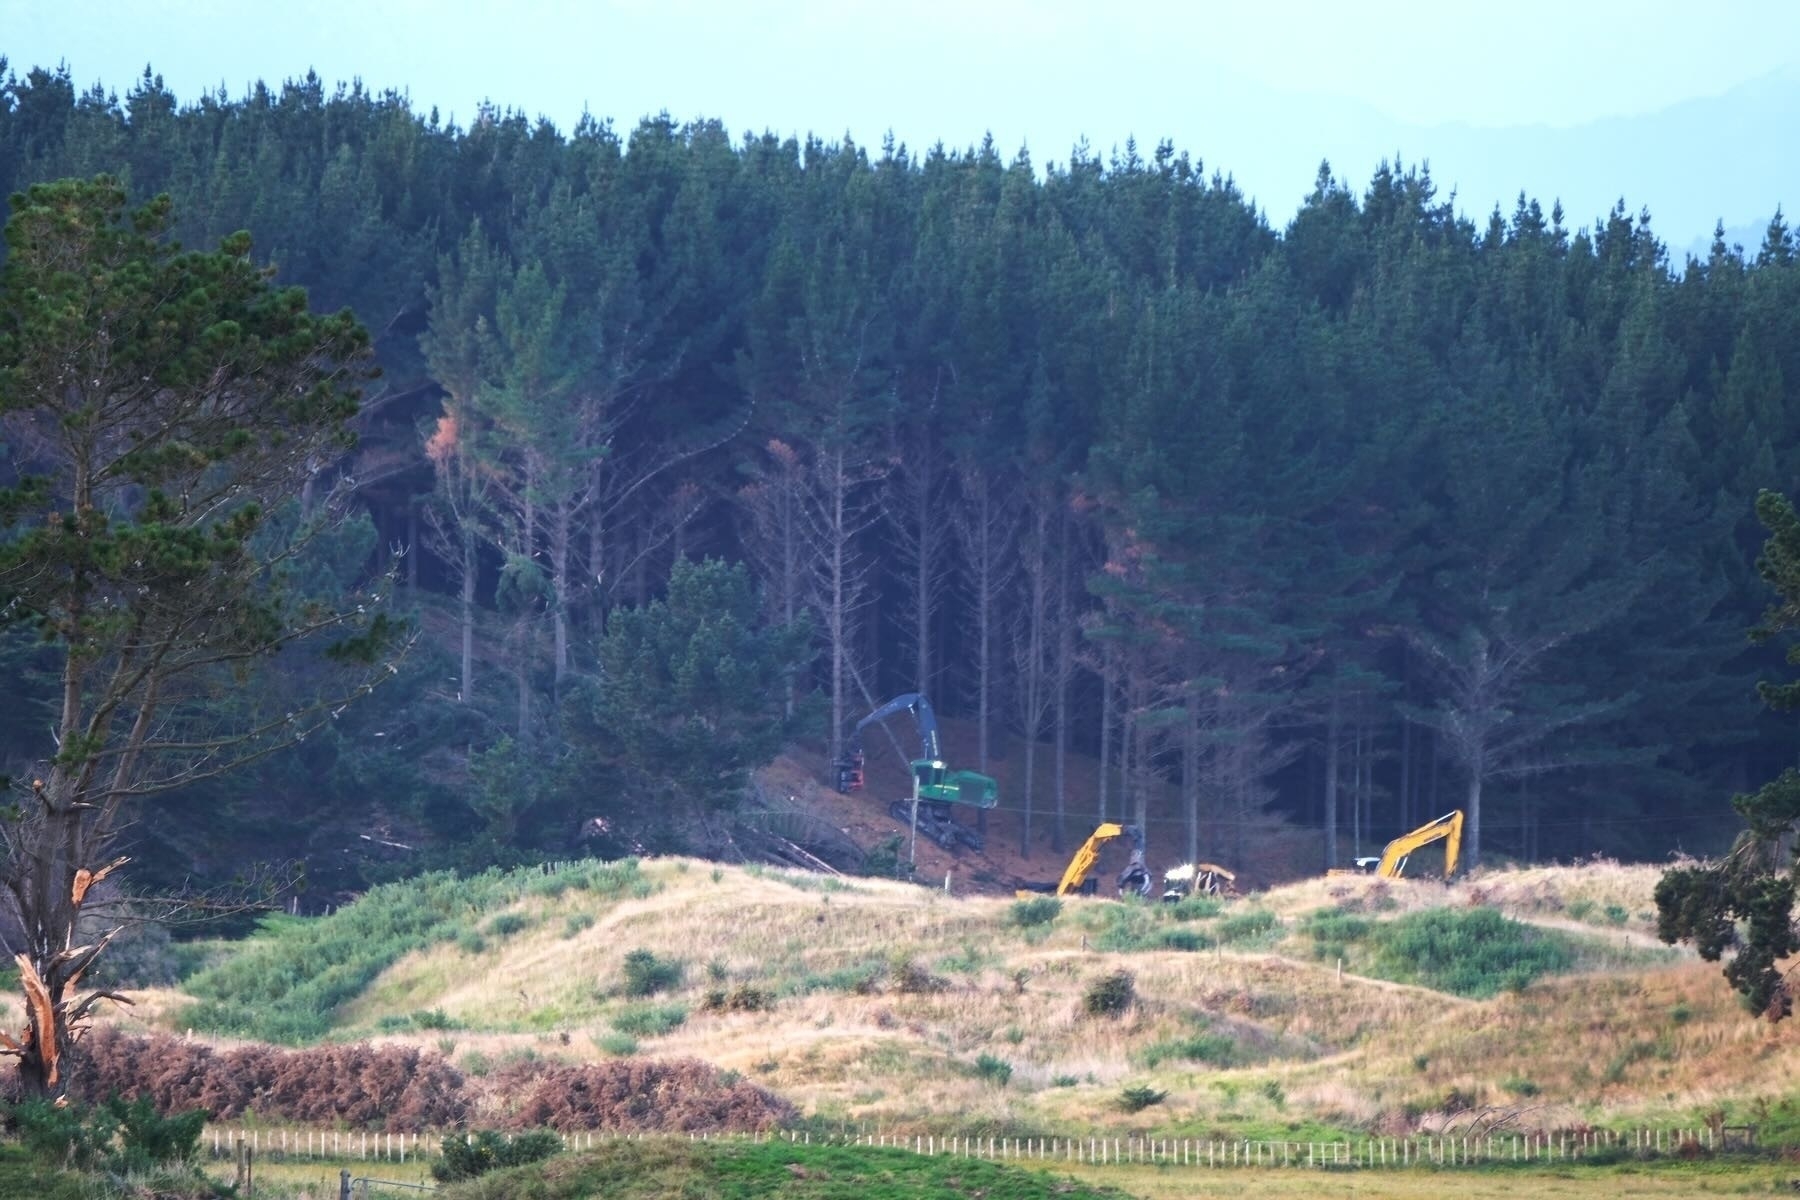 A machine felling a tree with diggers in the foreground.